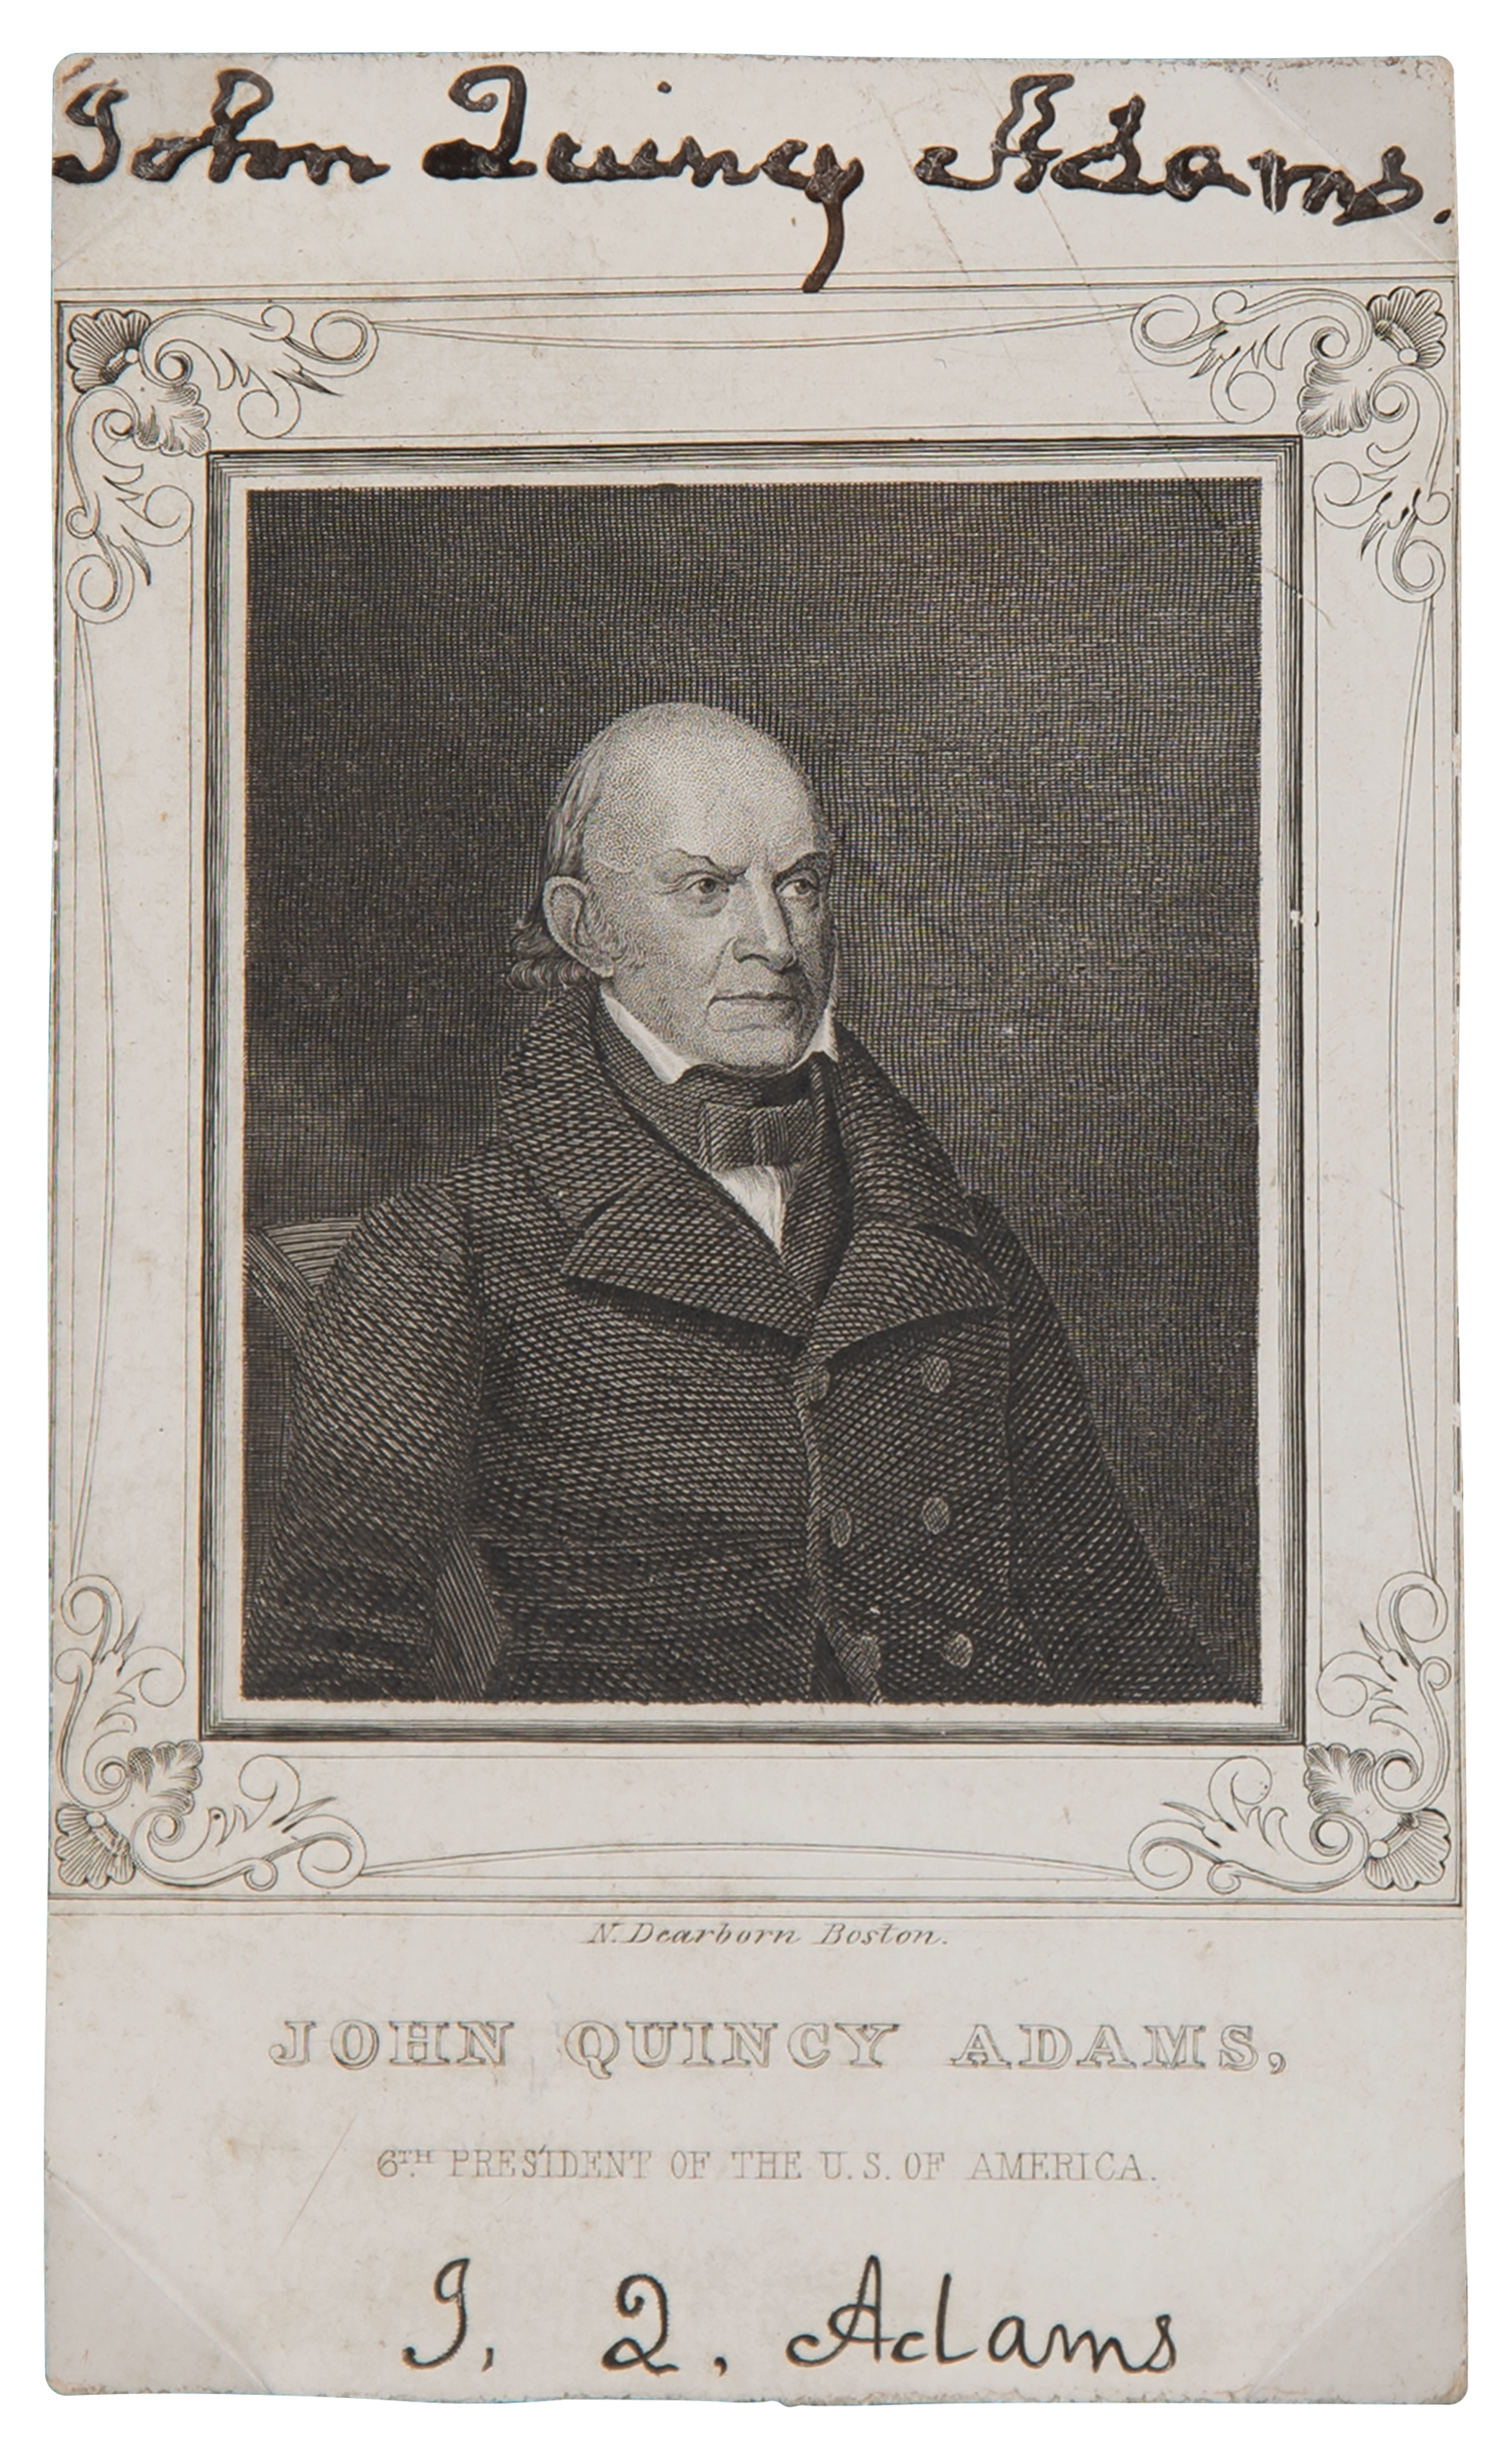 Lot #4 John Quincy Adams Signed Engraving by